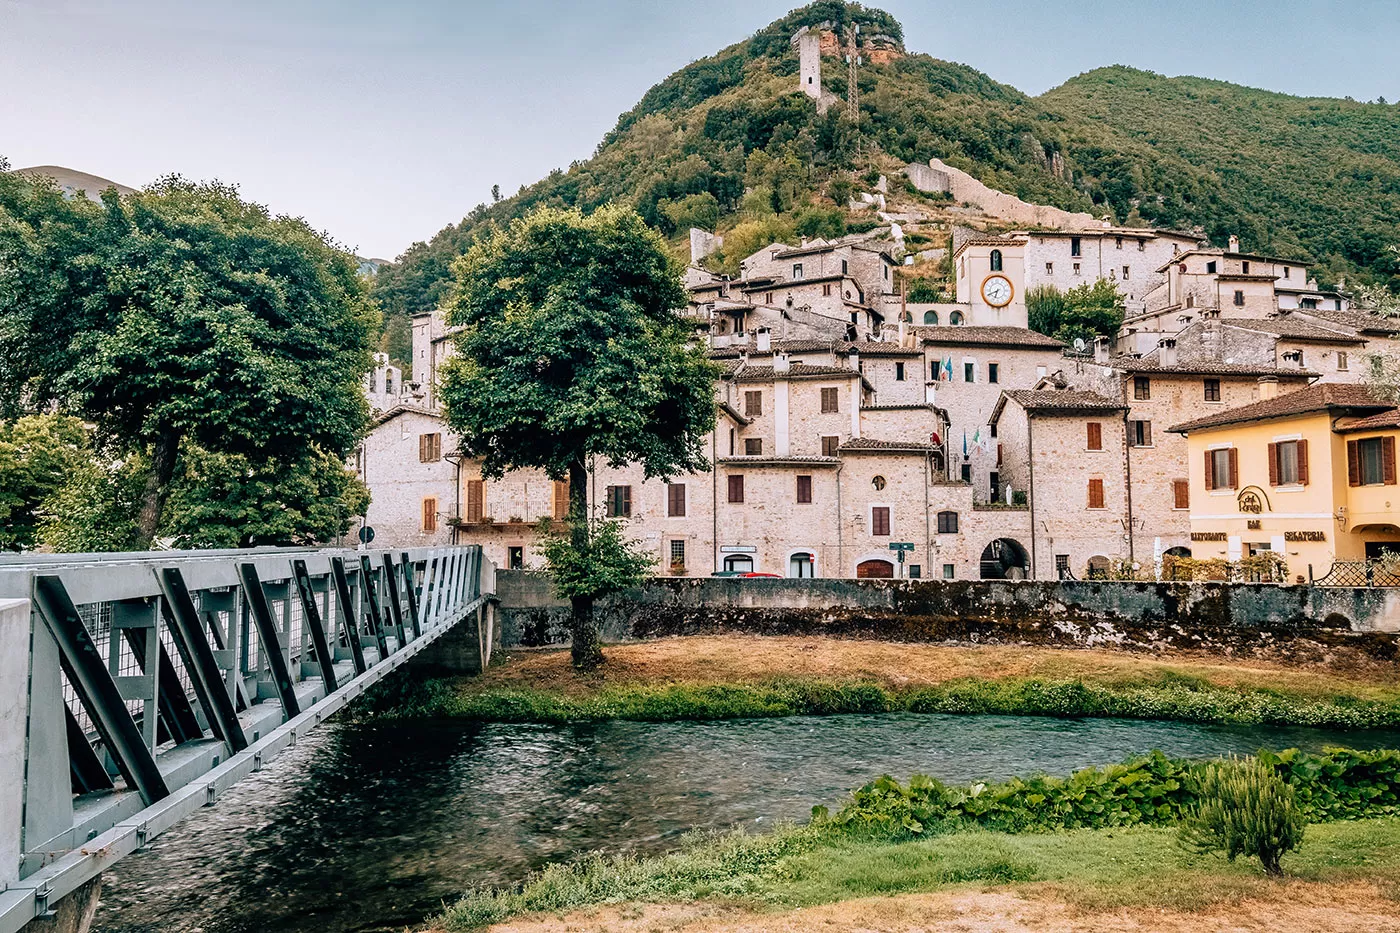 Things to do in Umbria Italy - Scheggino and river at sunrise